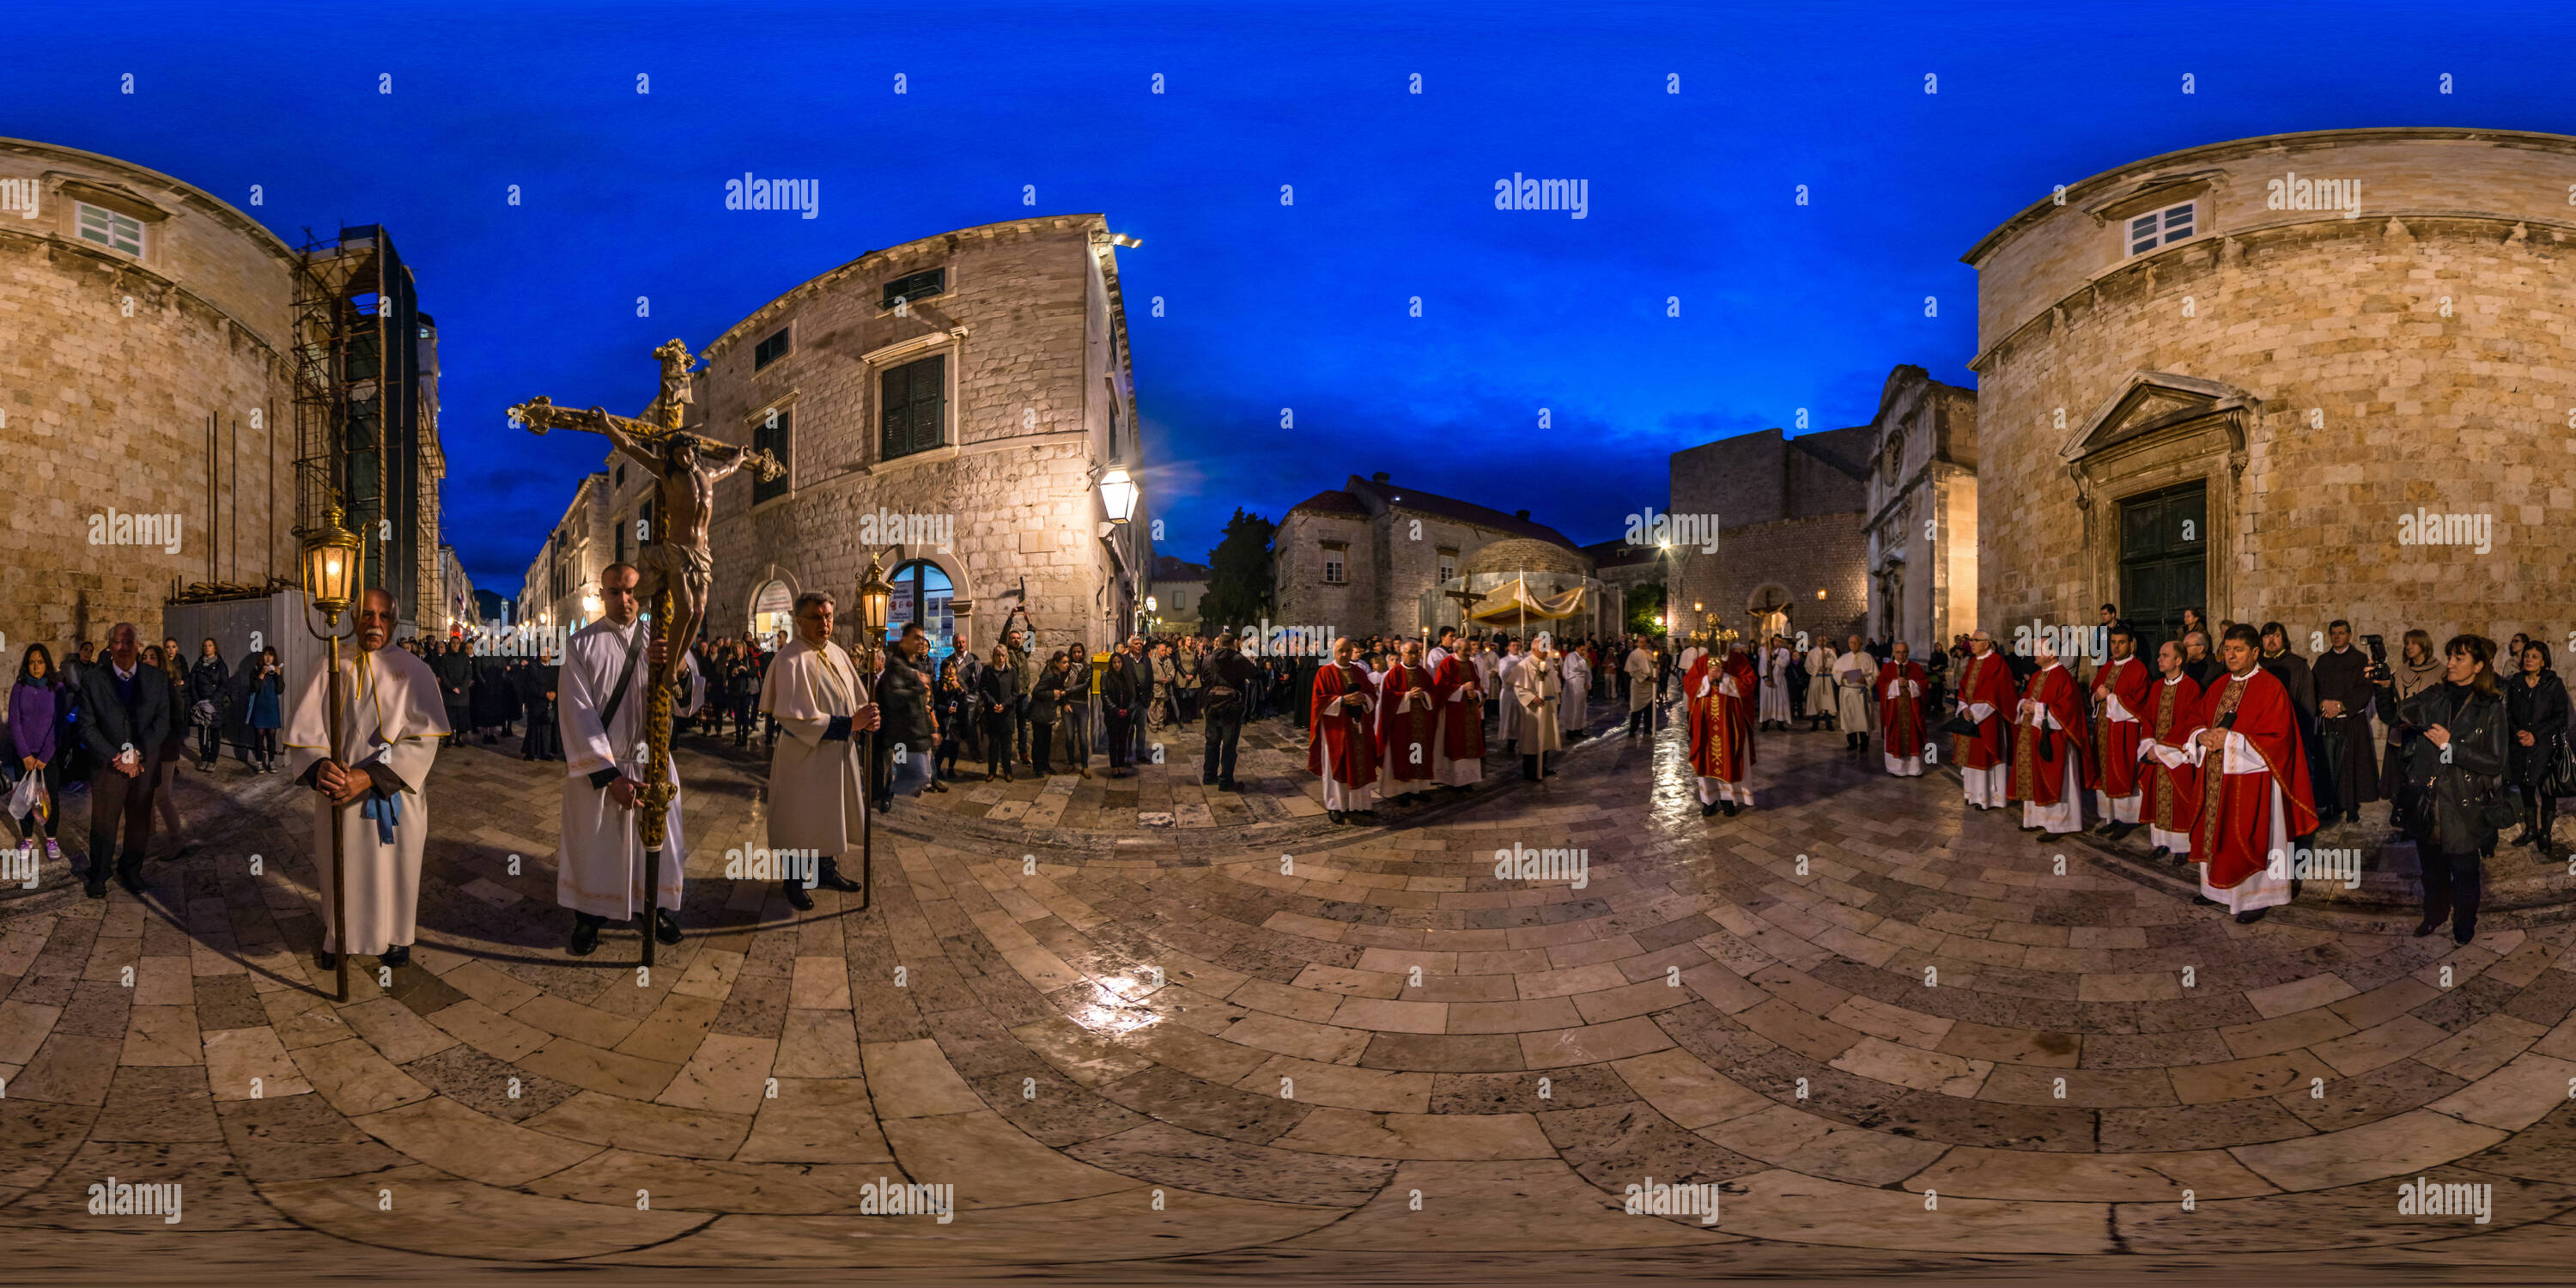 360 degree panoramic view of Procession along Dubrovnik streets on Good Friday 2014.